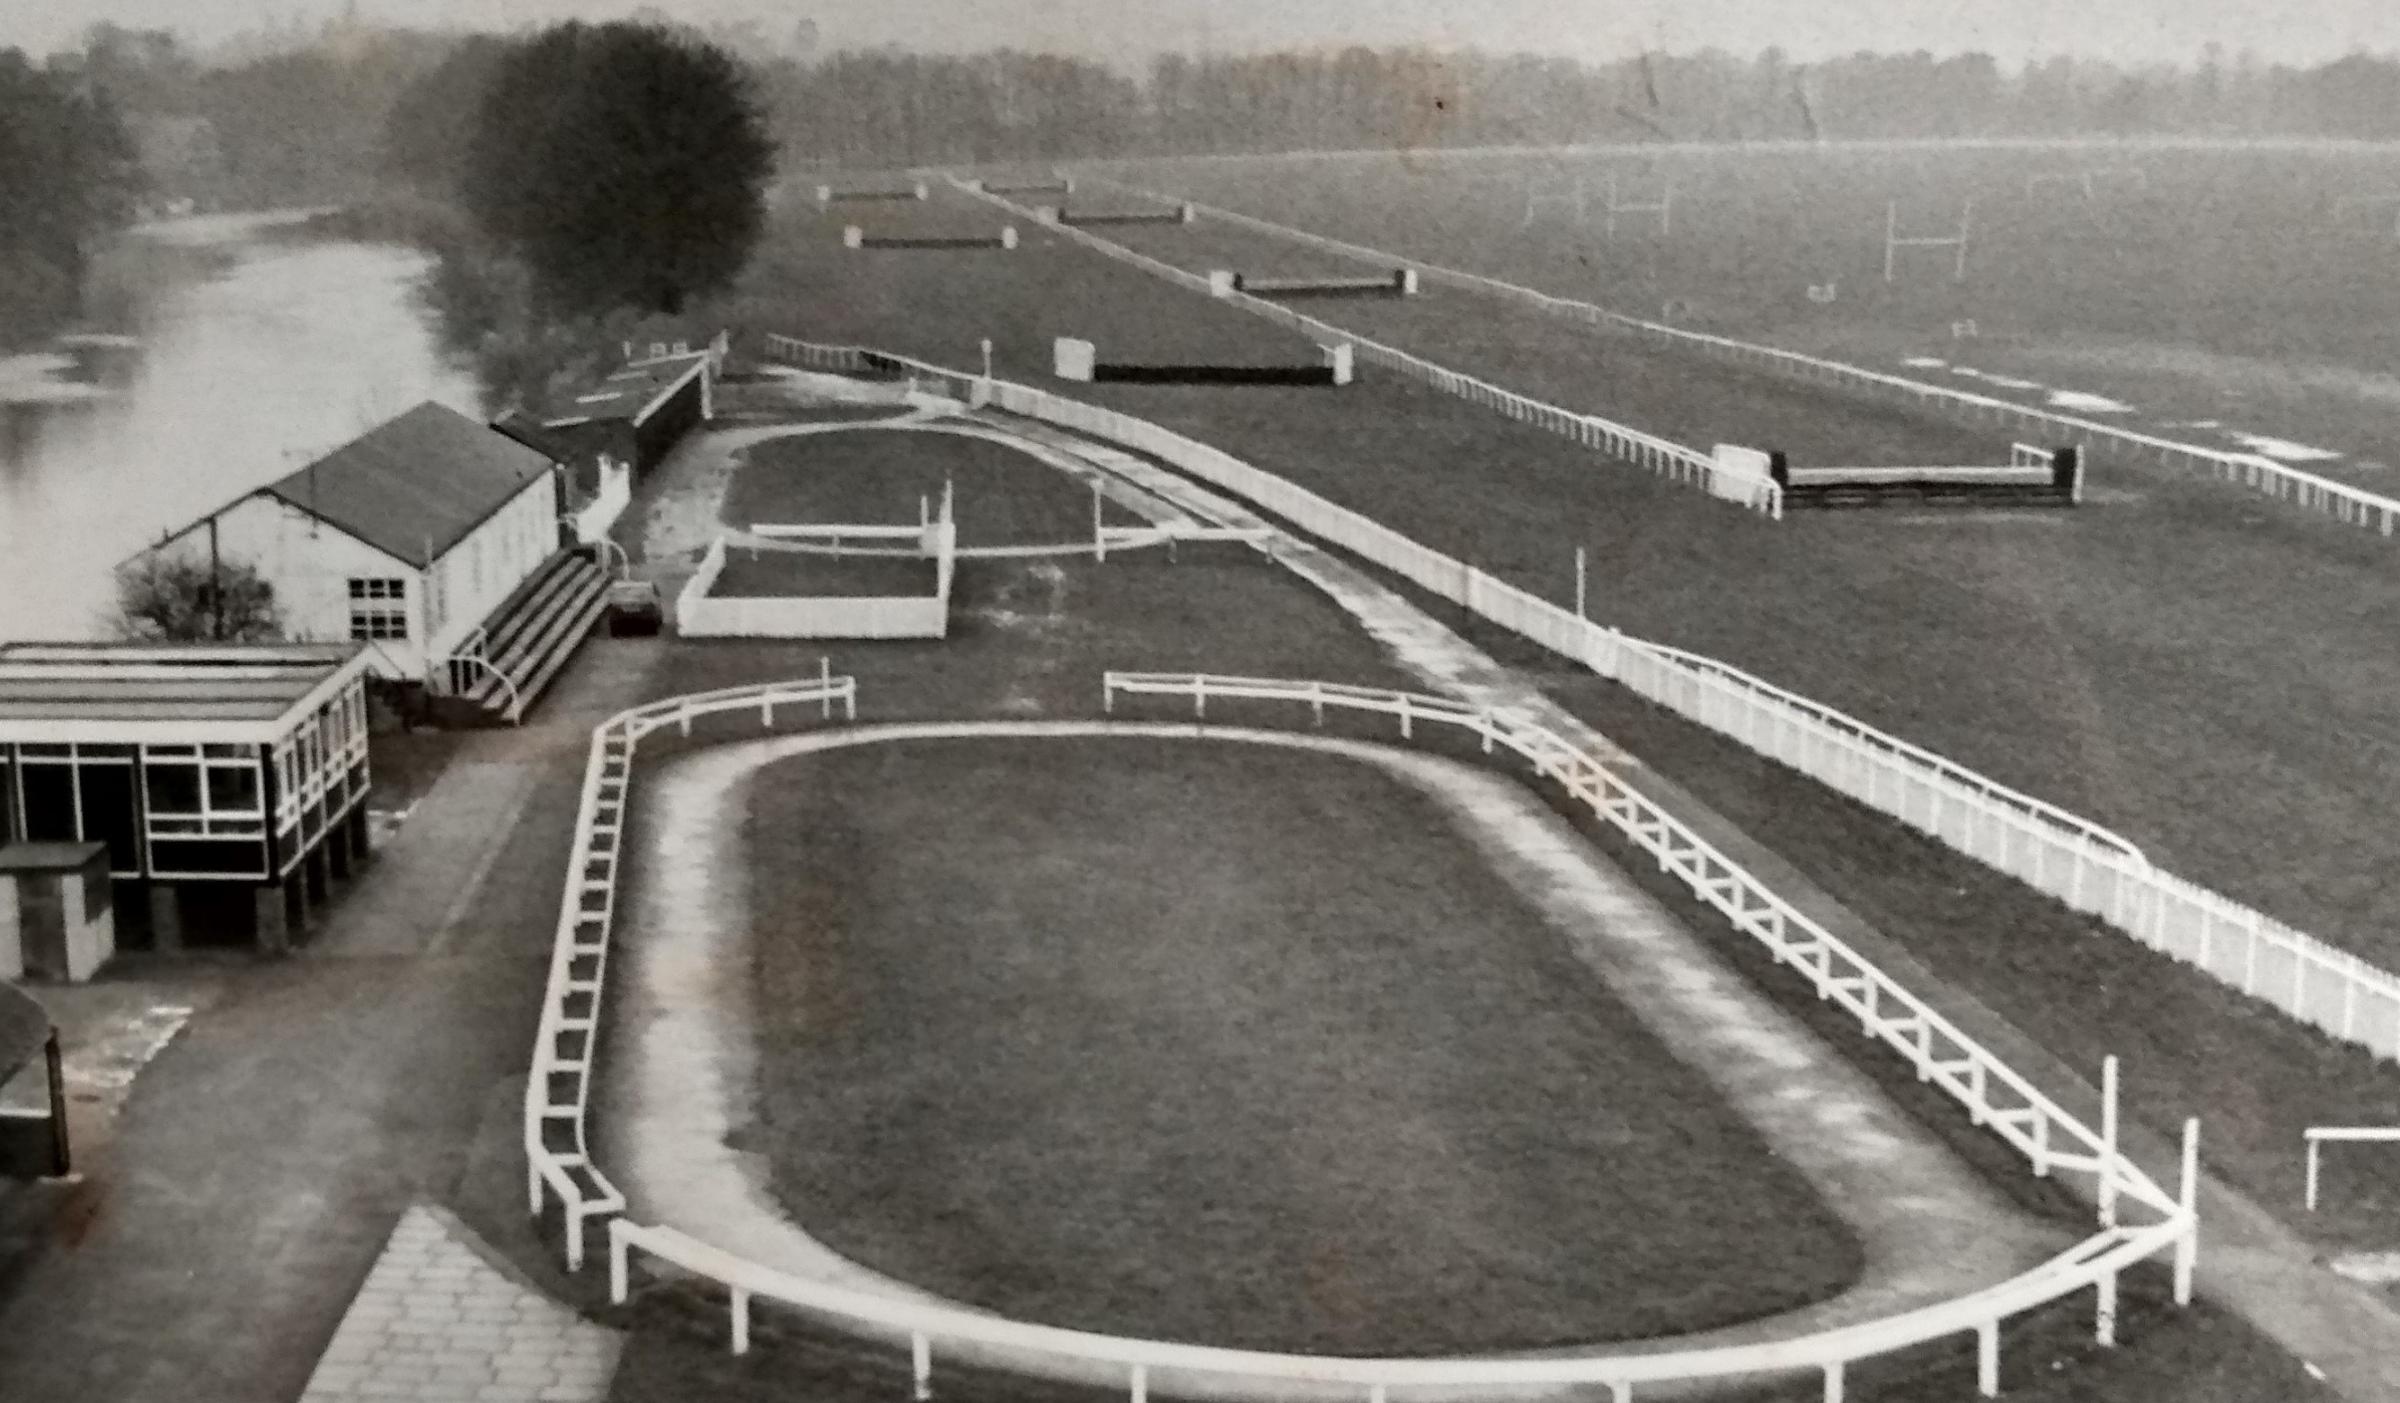 A lesser seen general view of the racecourse in January 1986